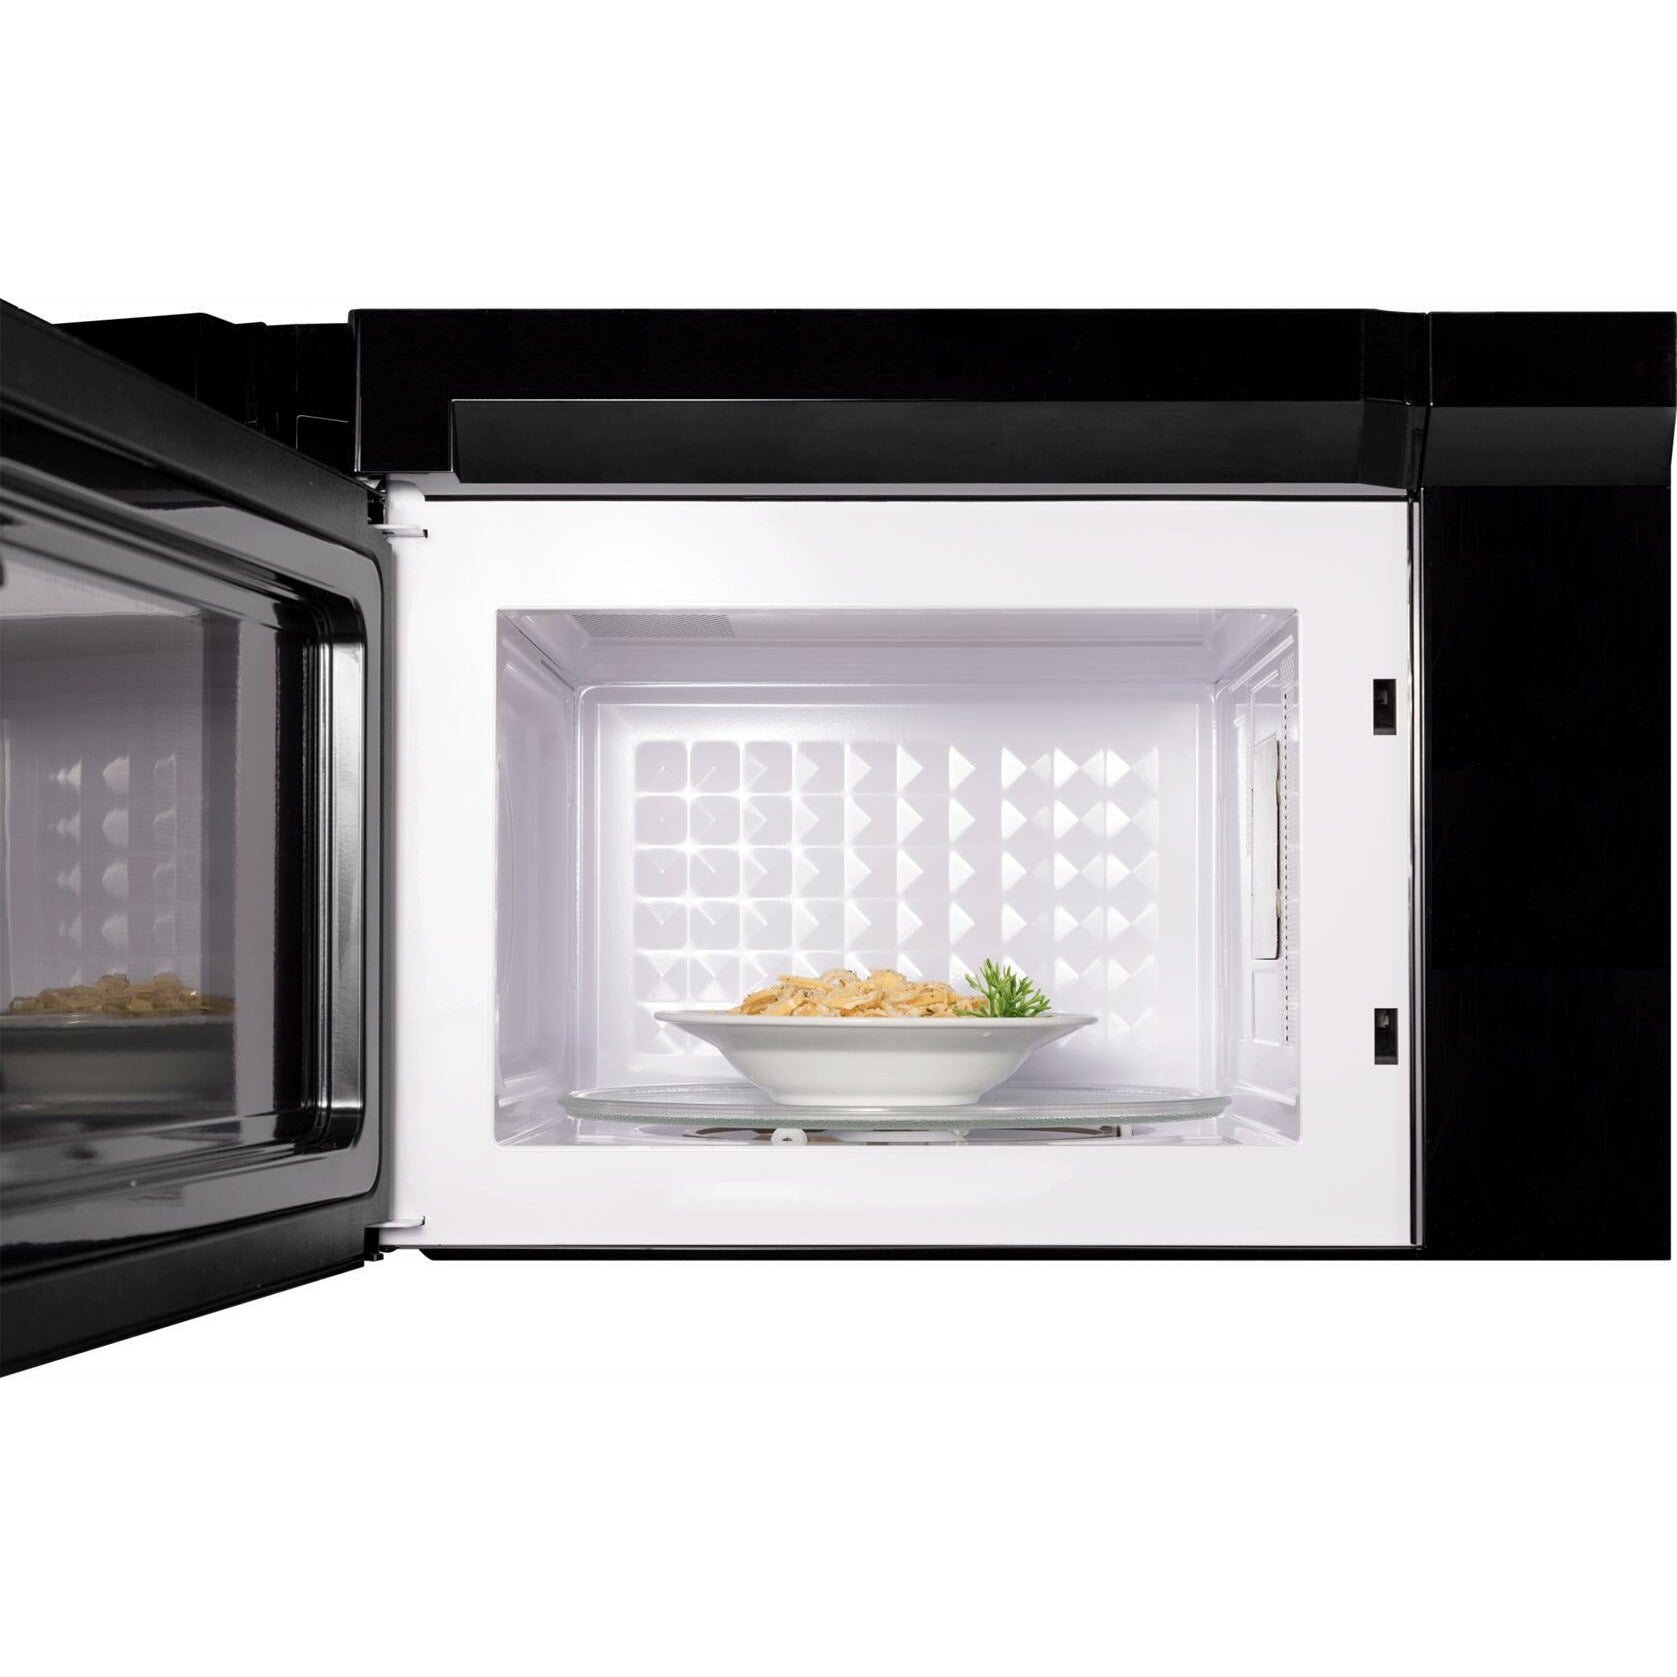 Forte 5 Series 24 Inch Over the Range 1.3 cu. ft. Capacity Microwave Oven - F2413MV5SS